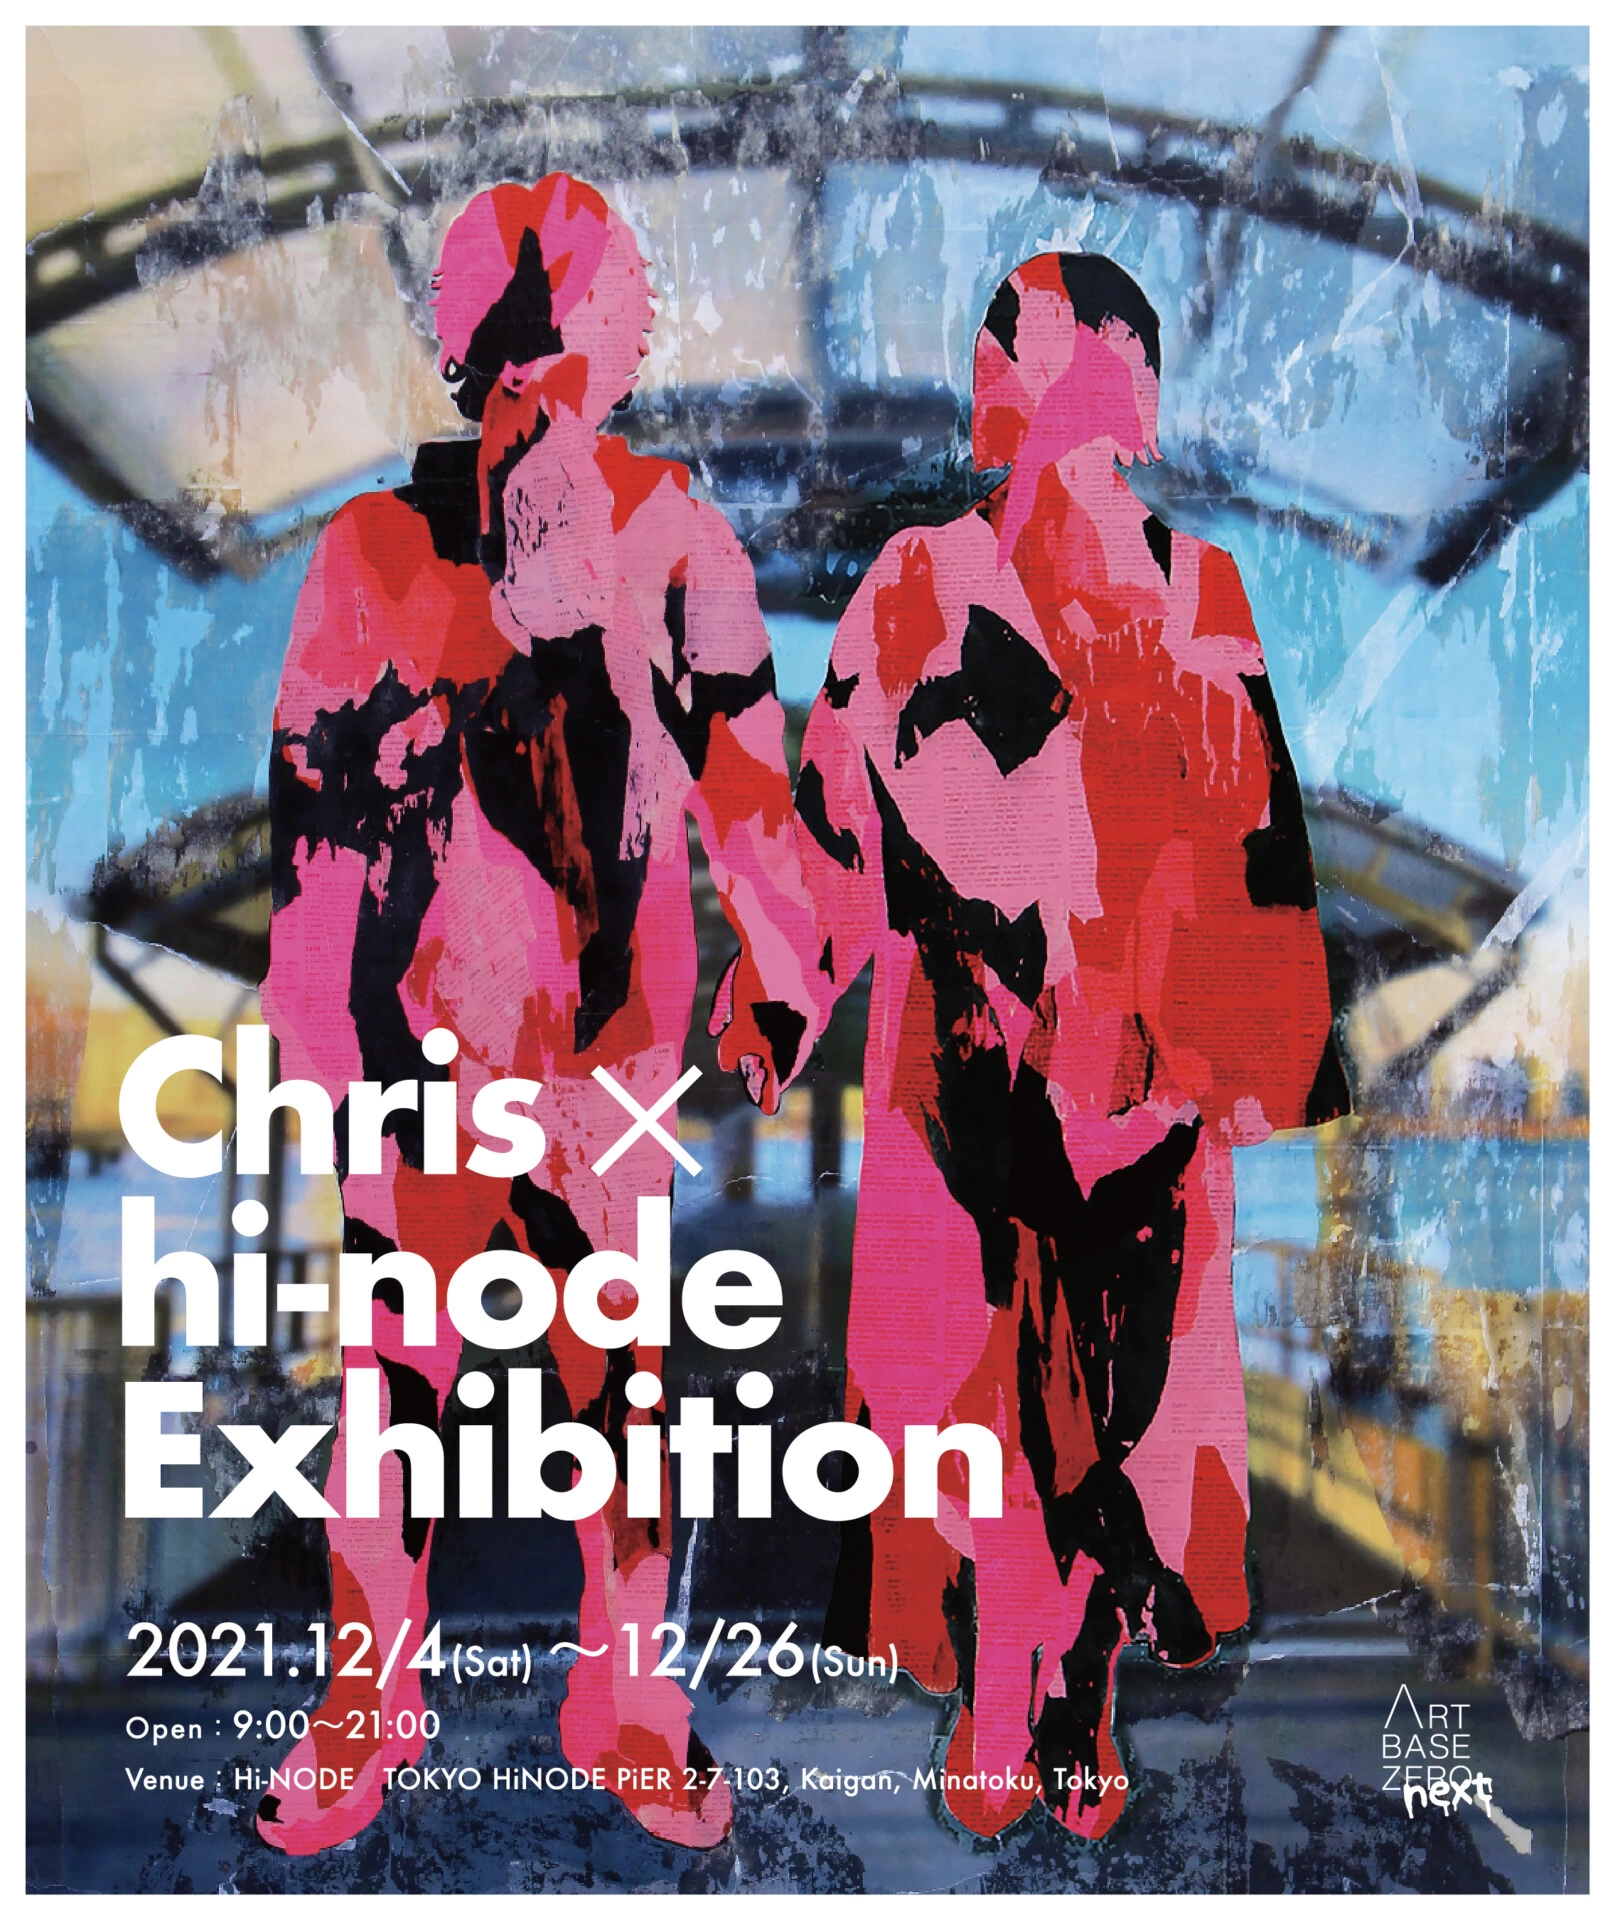 Chris×Hi-NODE Exhibition “Love is a battlefield (It‘s hard to see Love)”